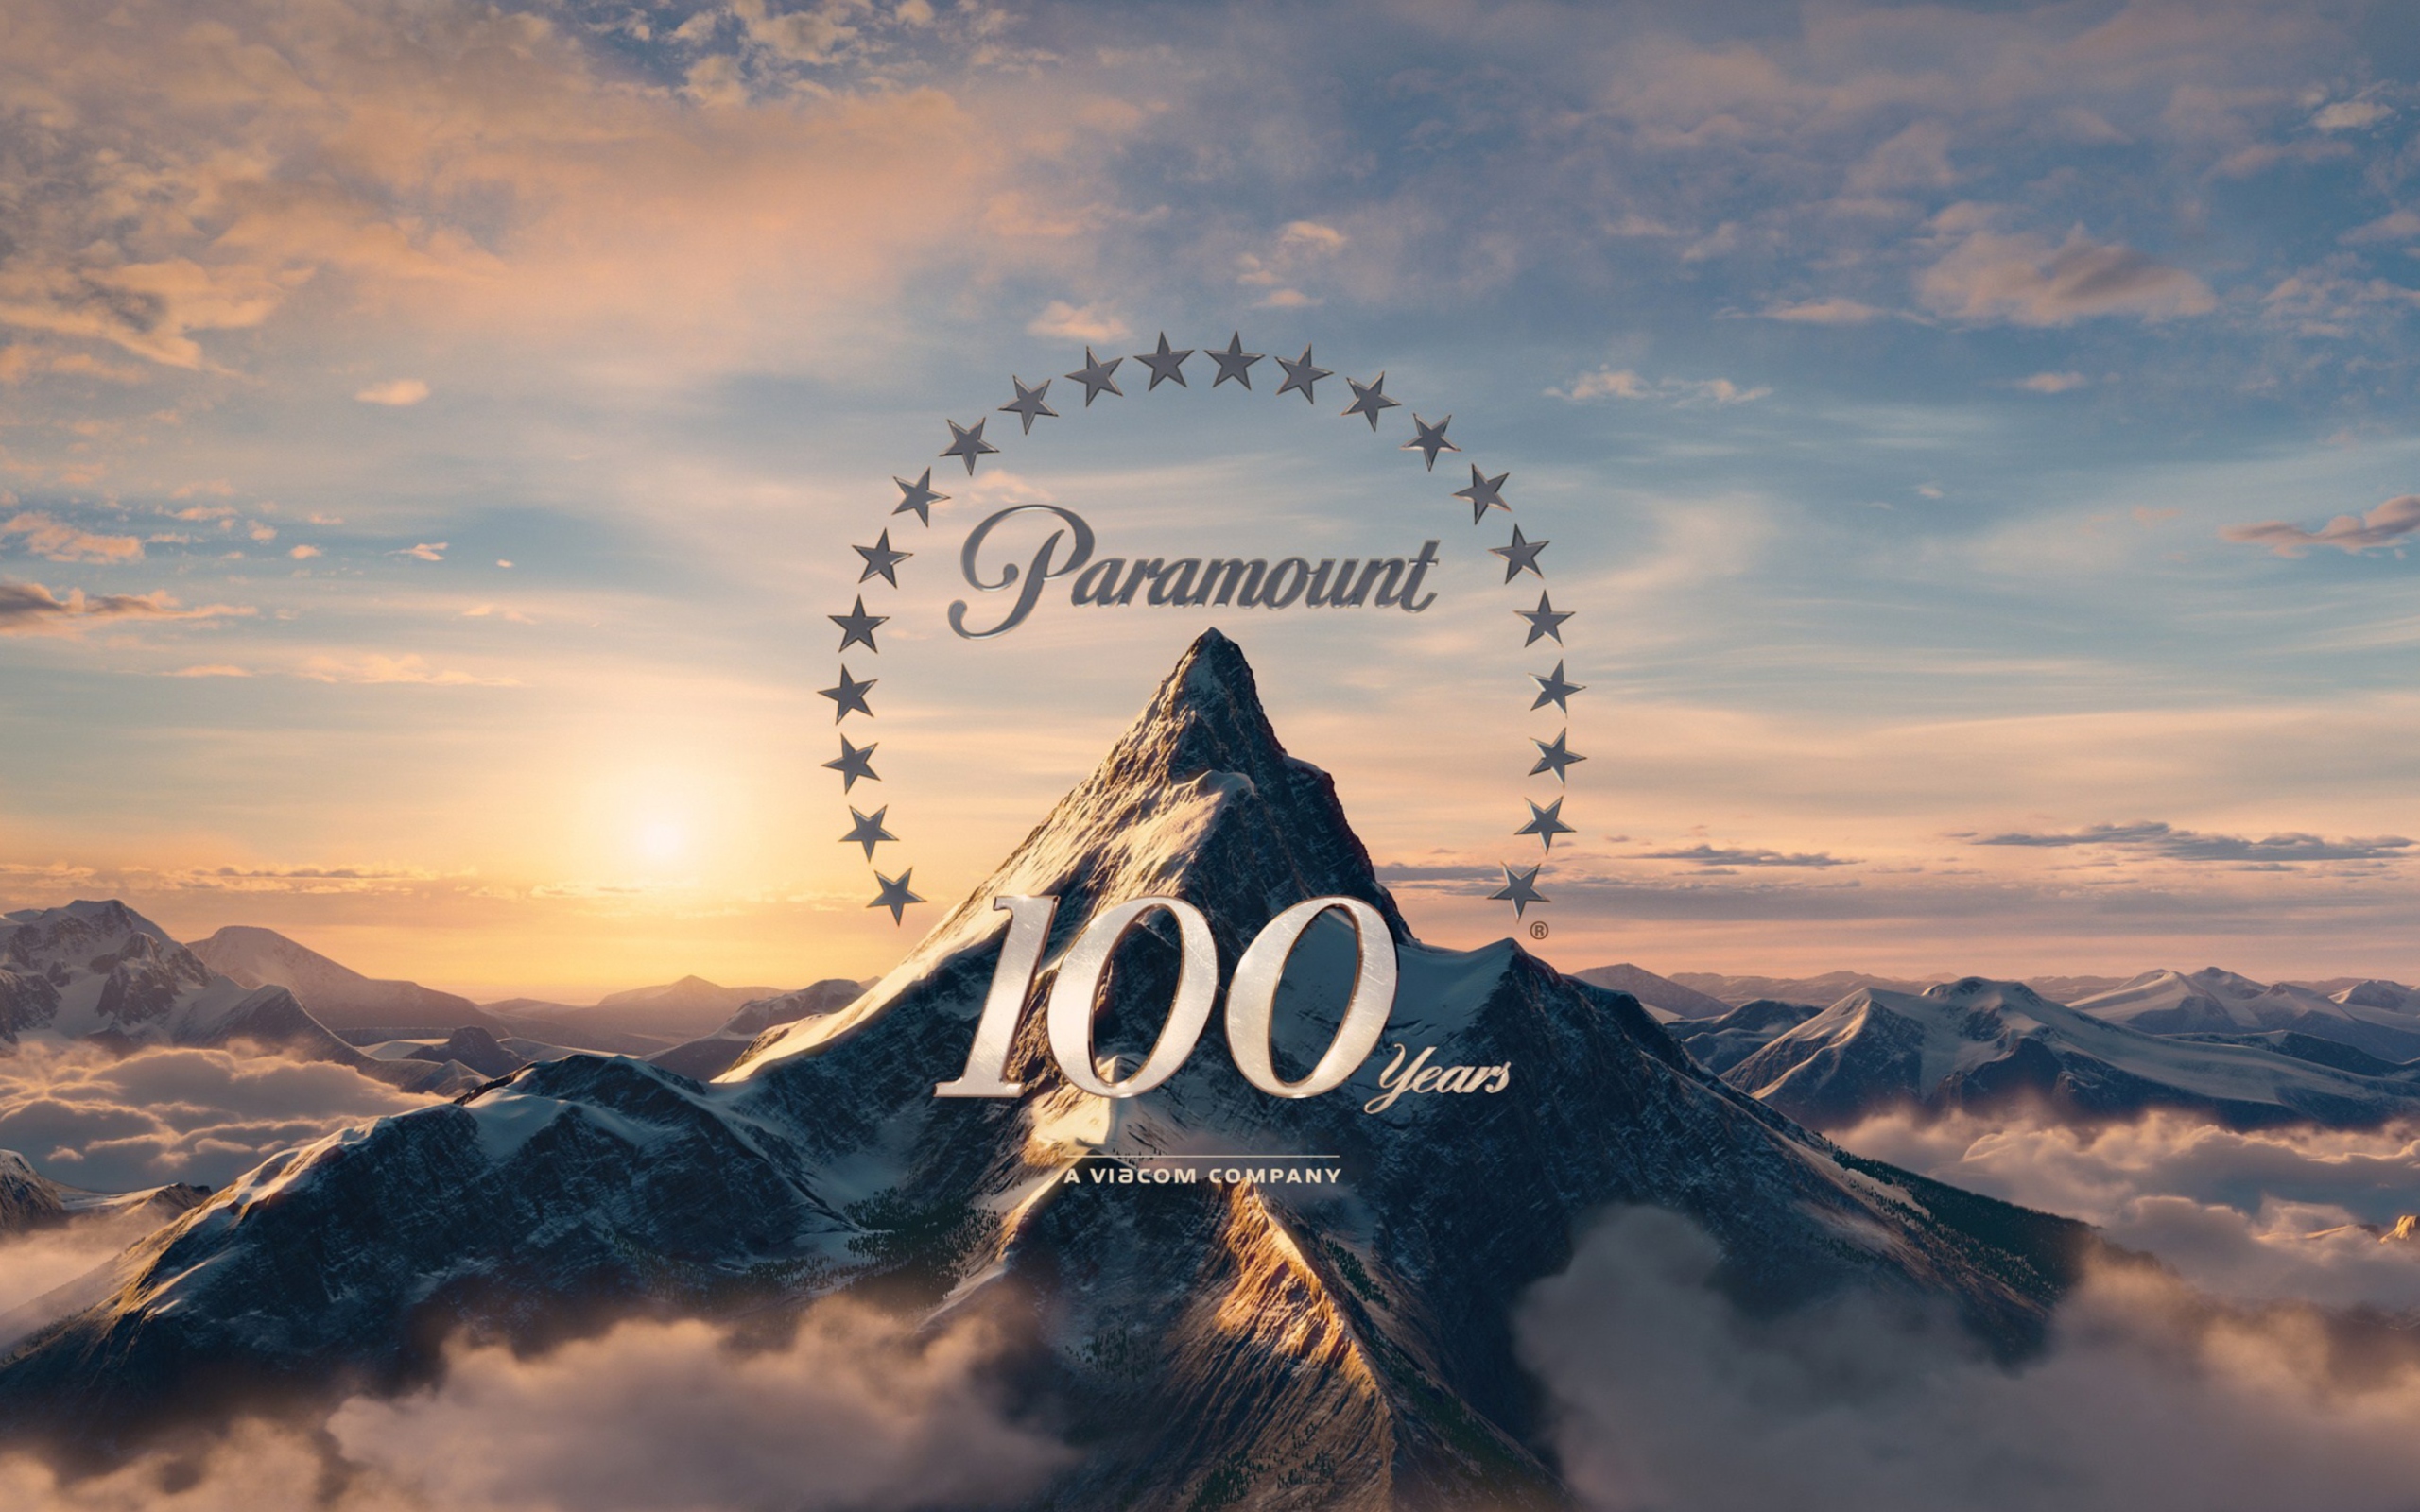 Paramount Pictures 100 Years wallpaper 2560x1600